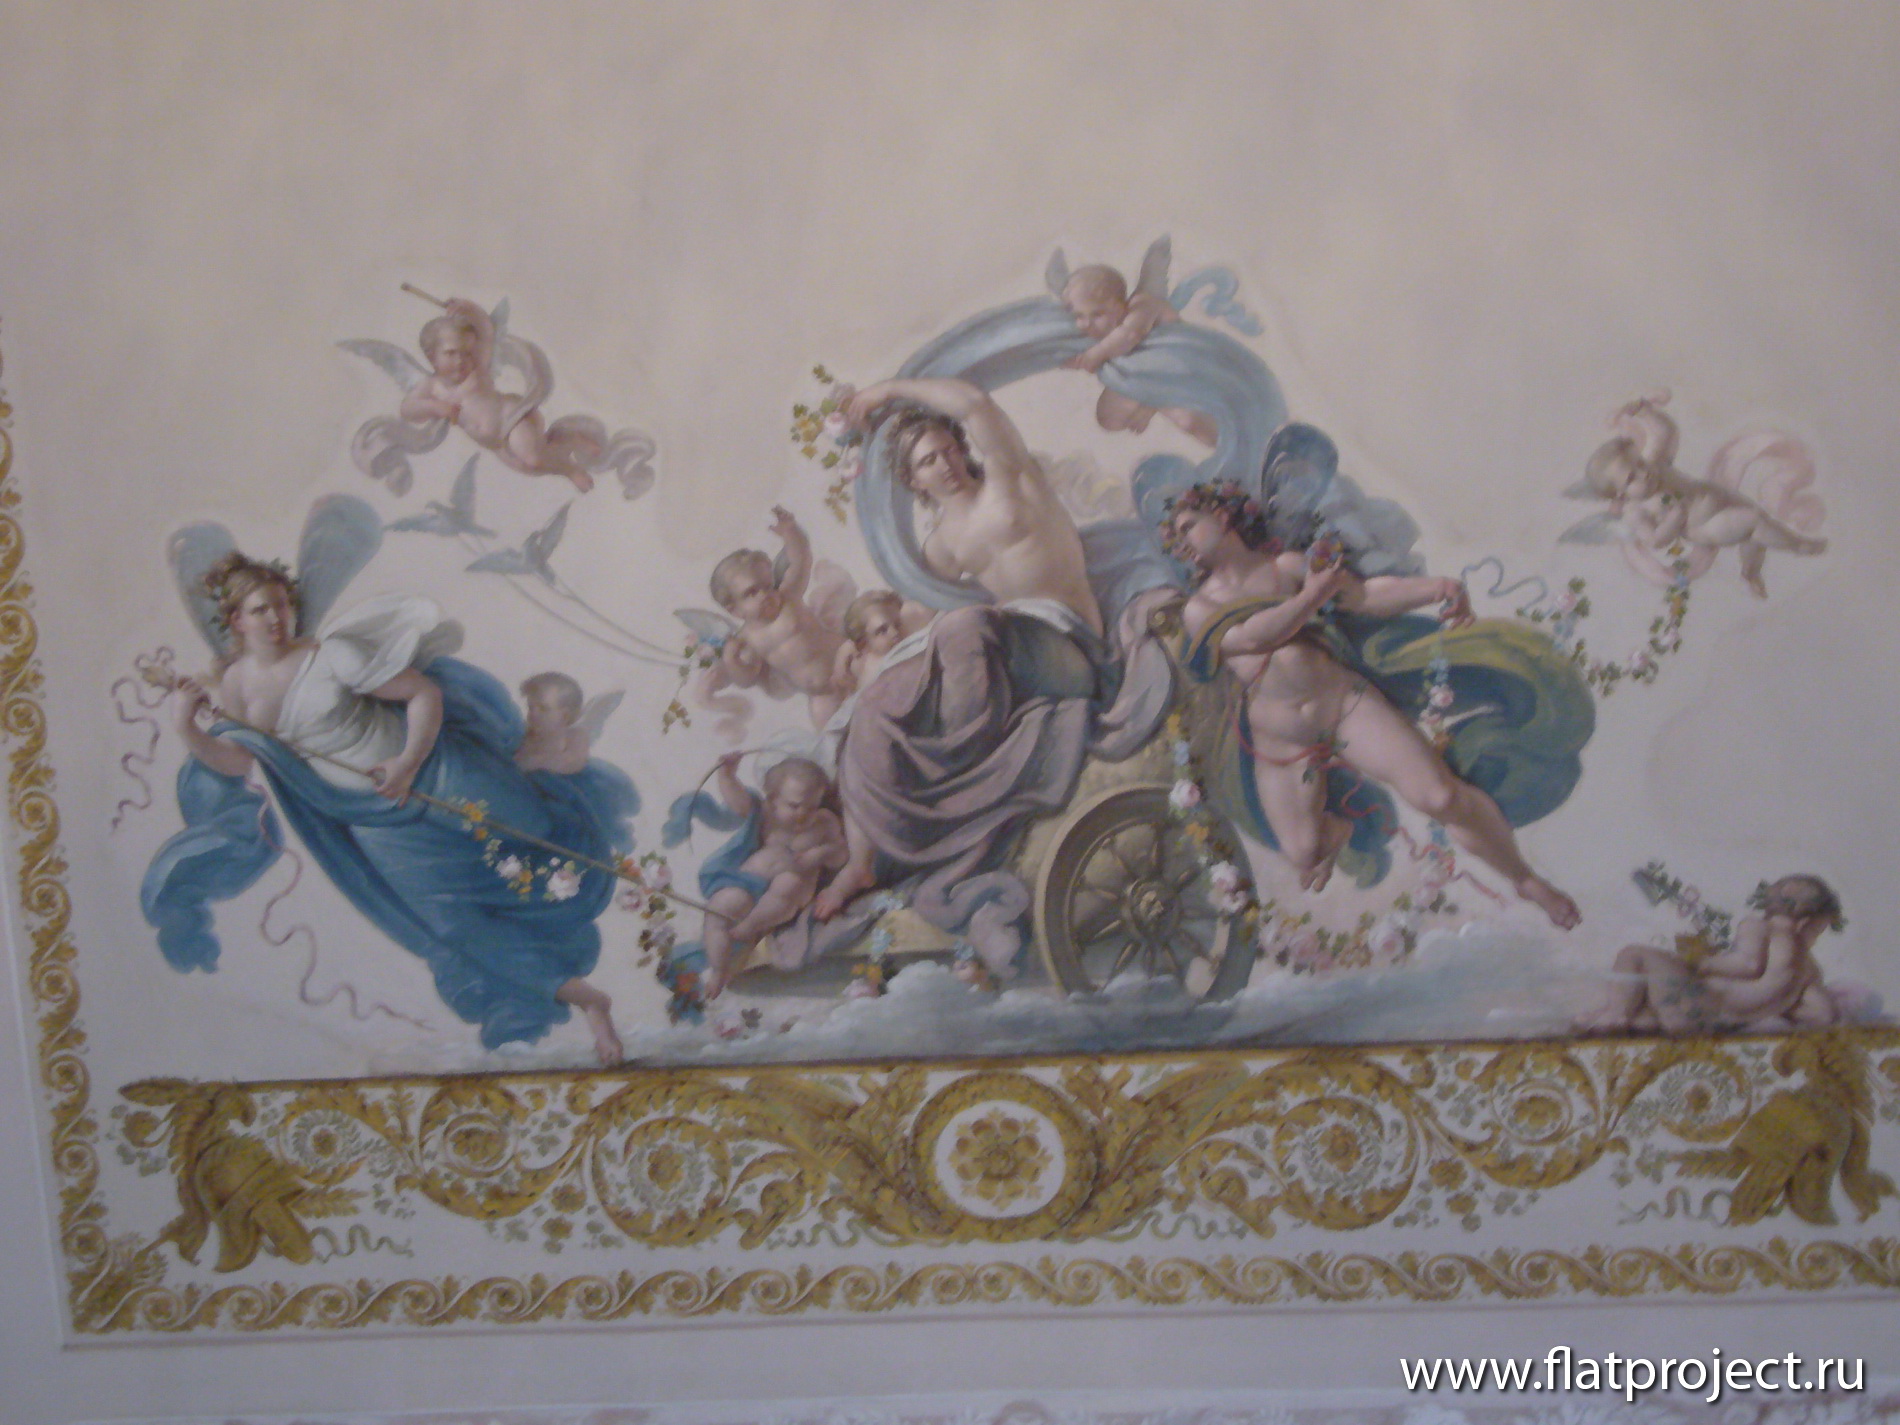 The State Russian museum interiors – photo 118